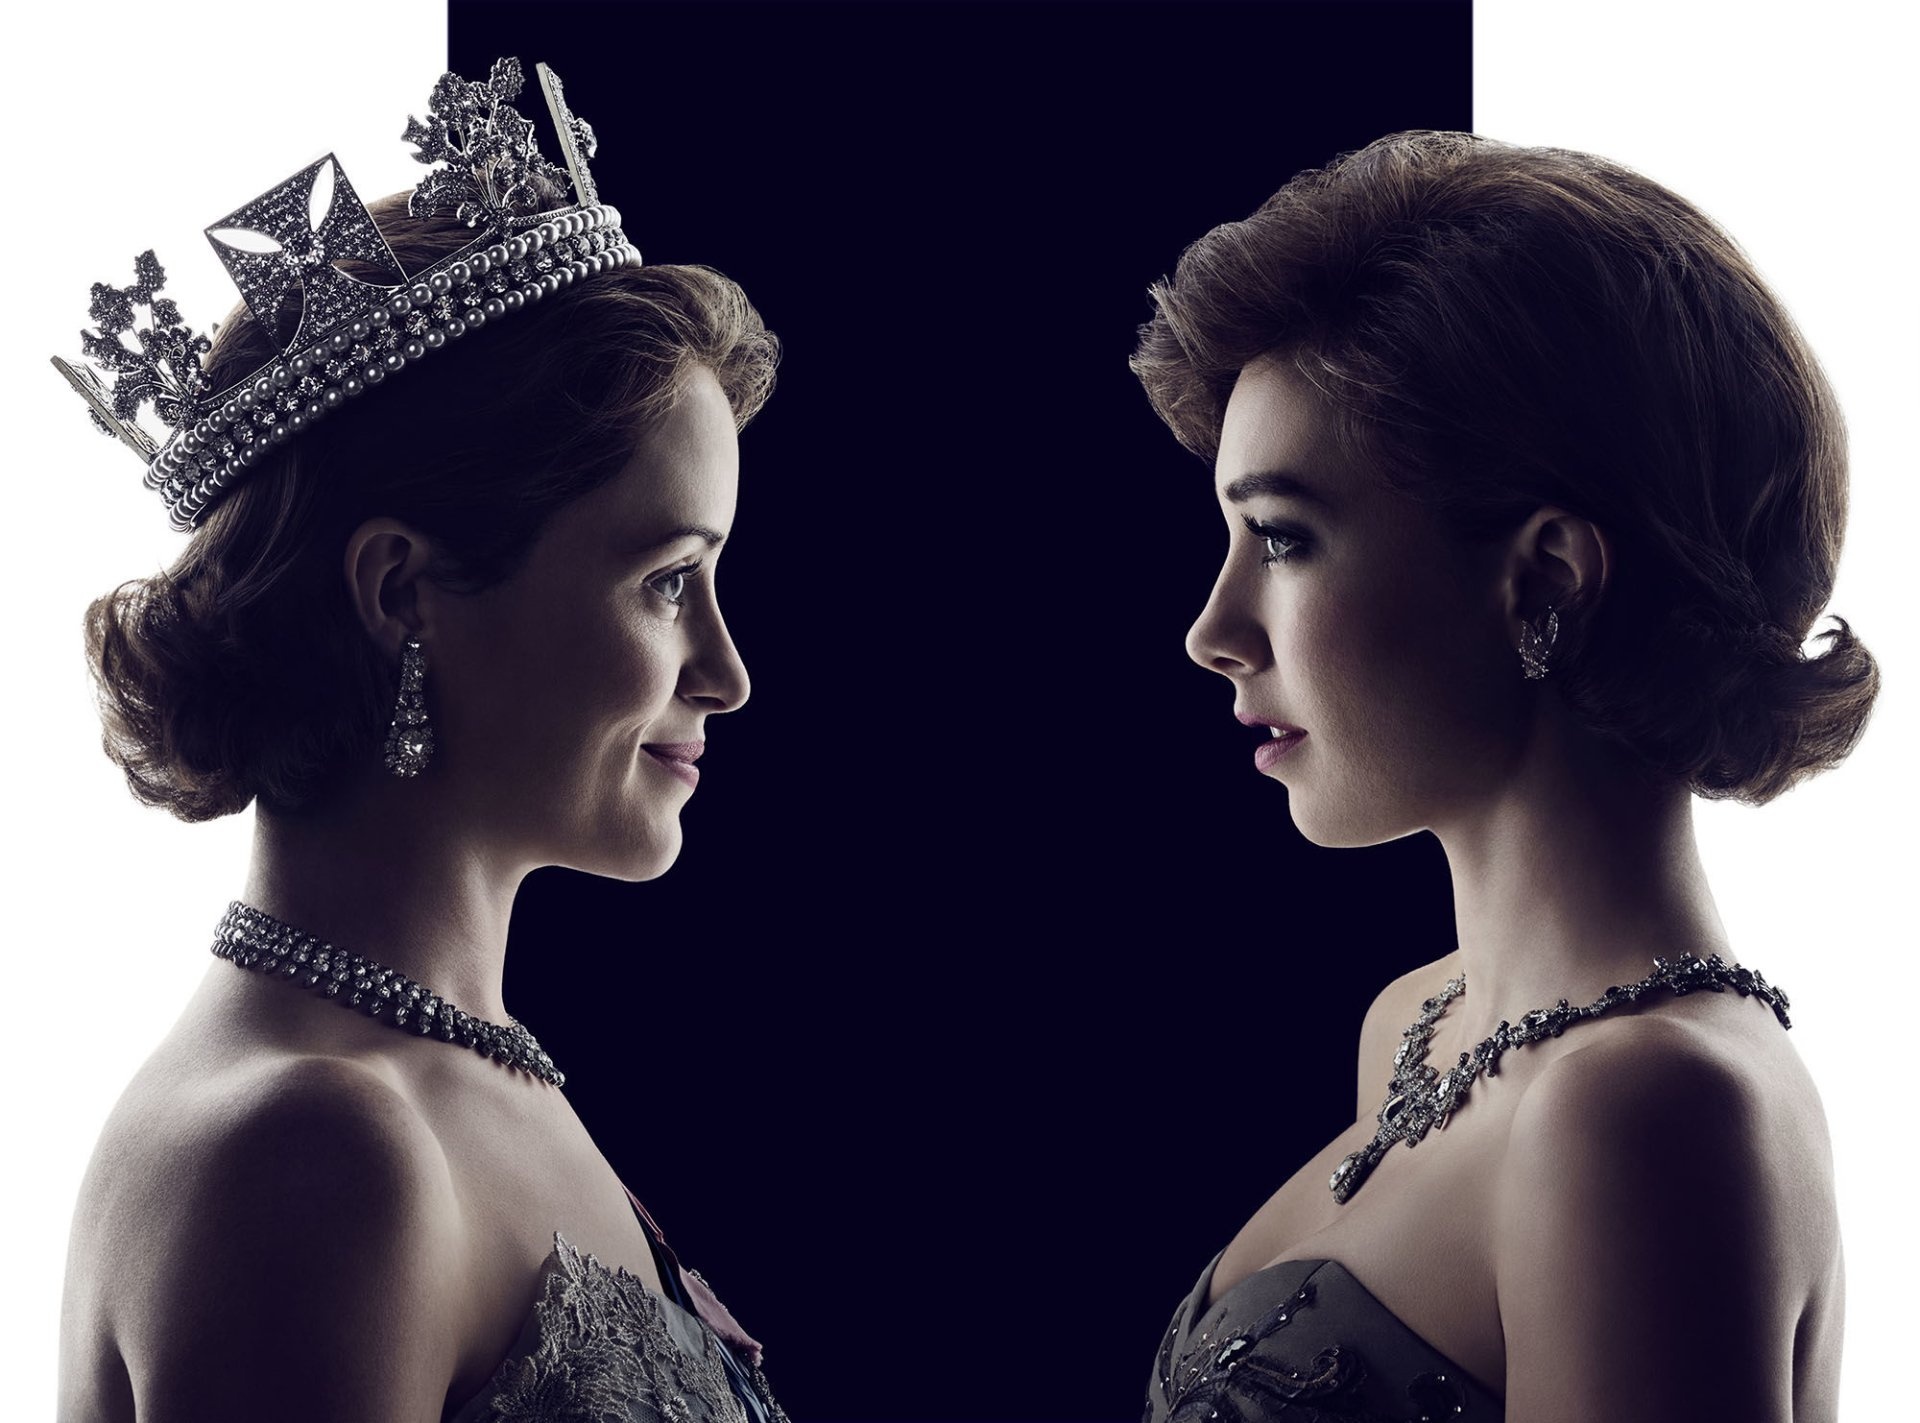 The Crown, HD wallpapers and backgrounds, 1920x1430 HD Desktop